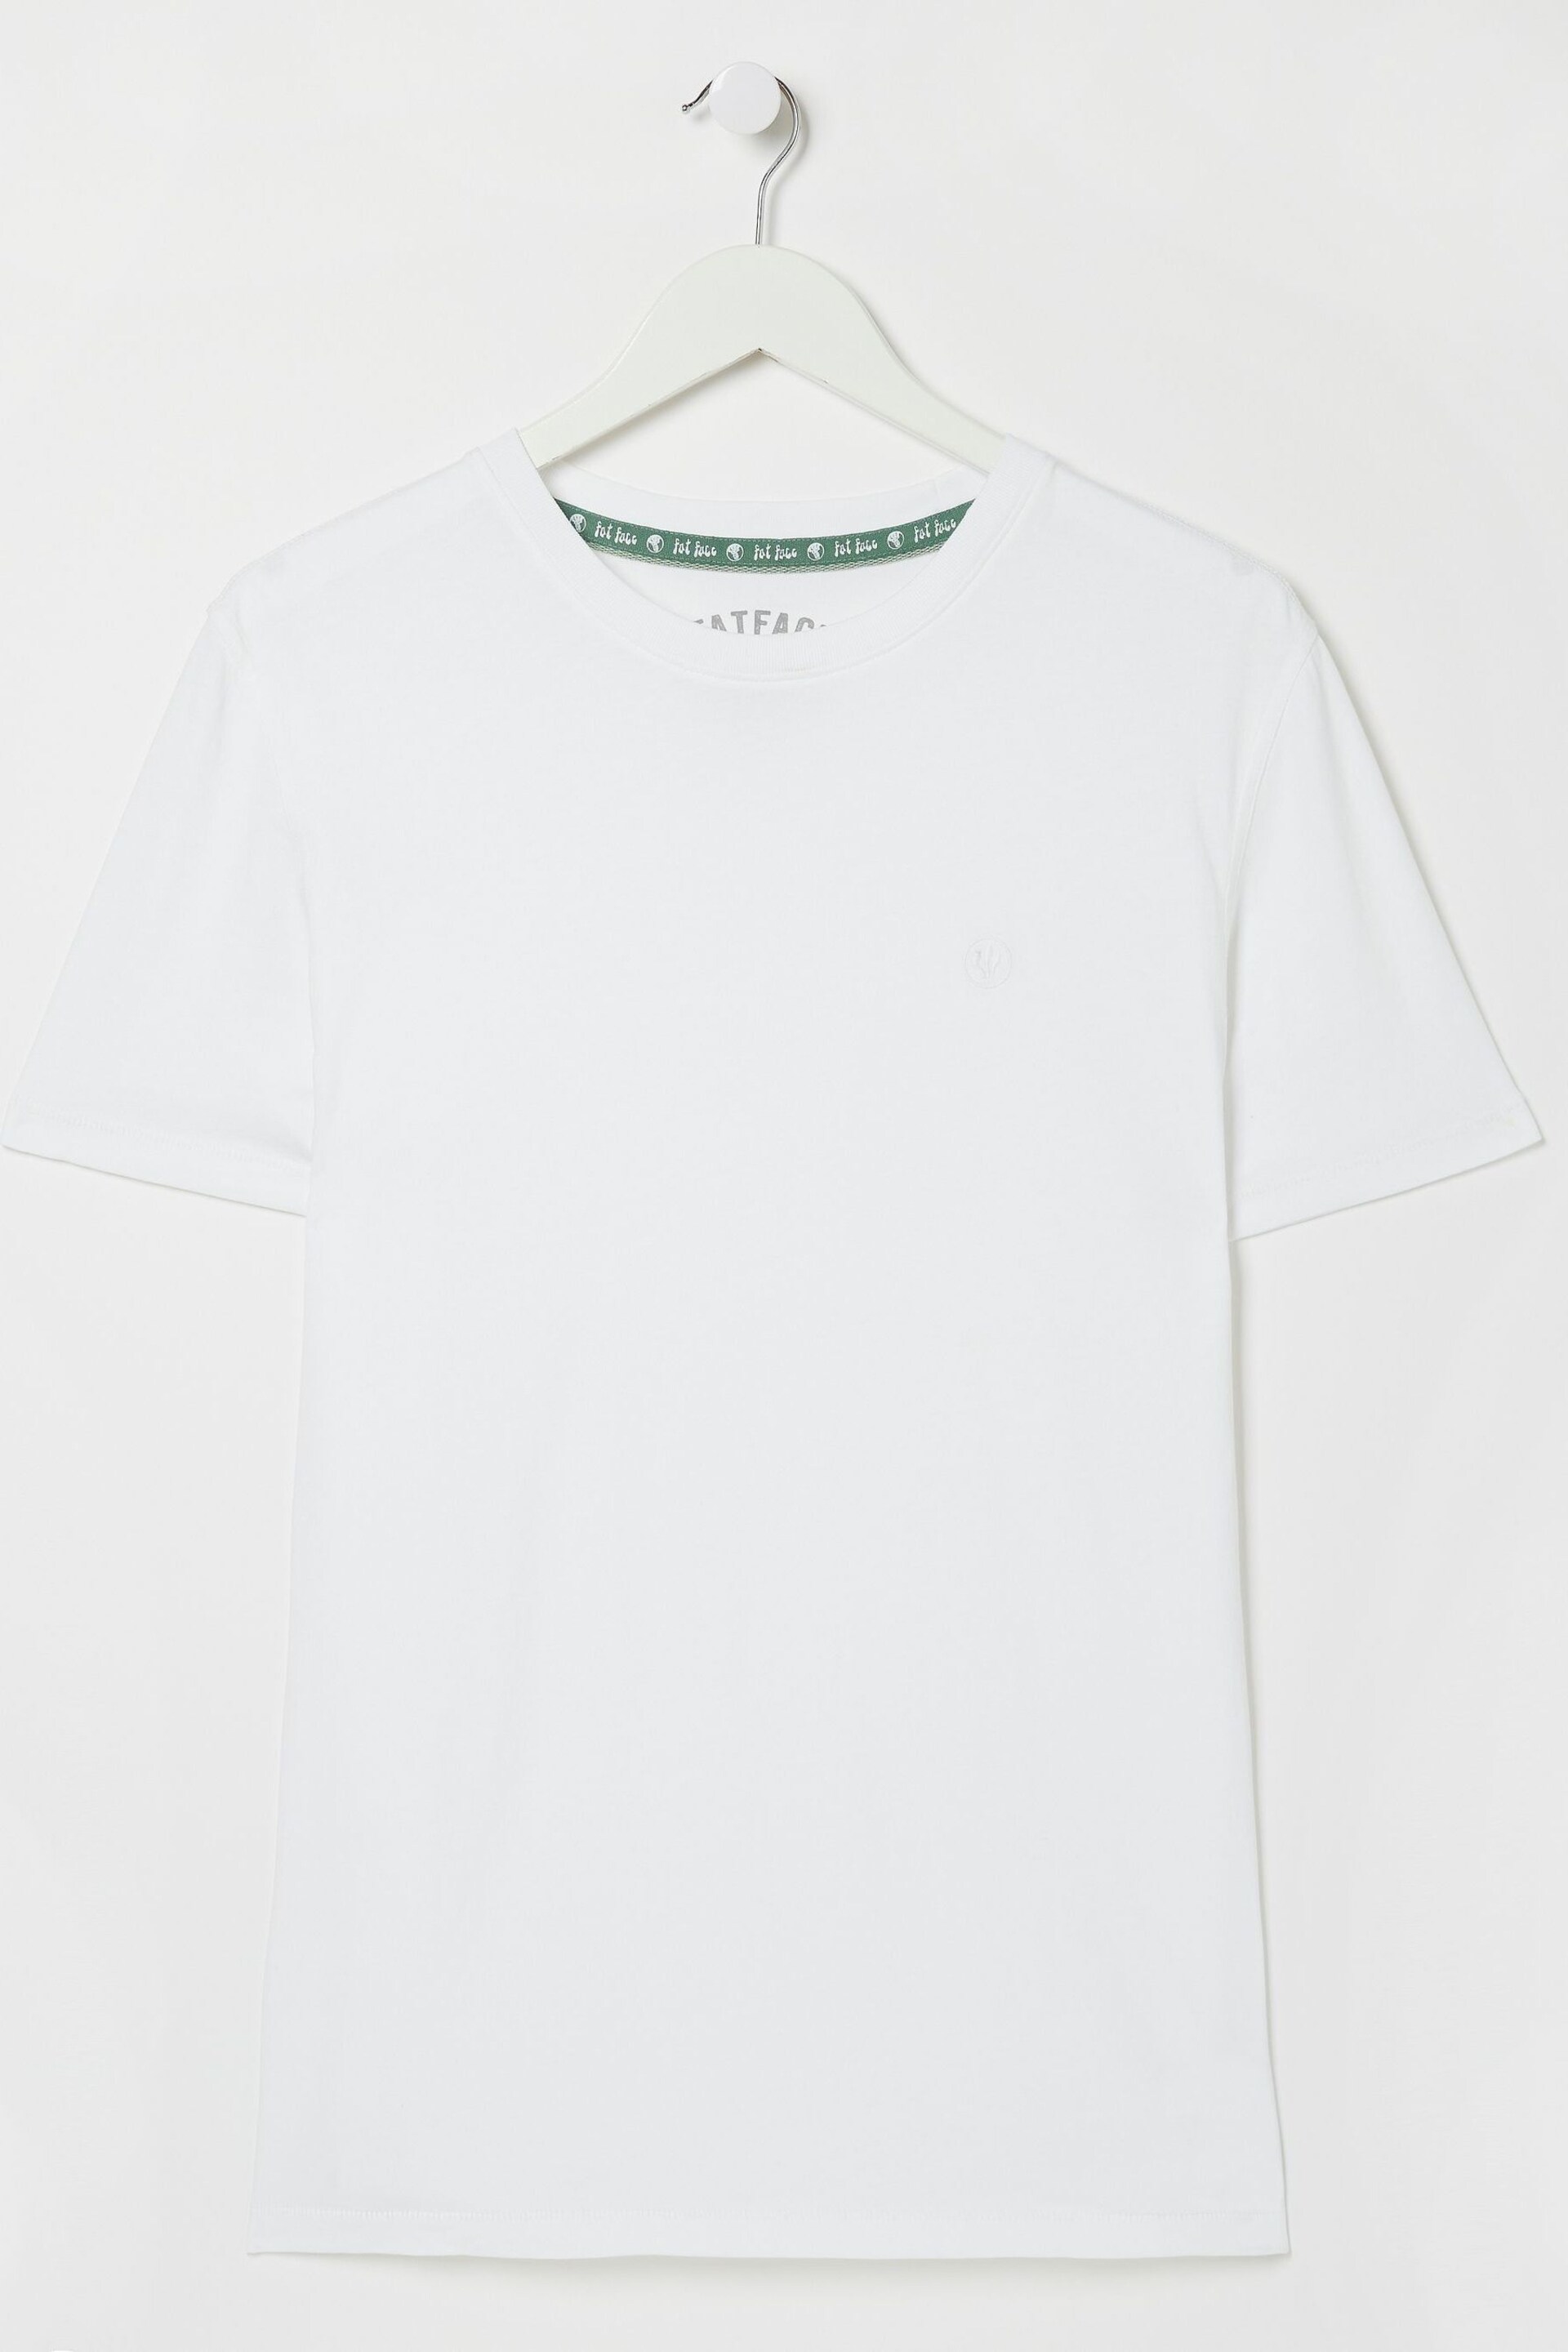 FatFace White T-Shirt - Image 5 of 5